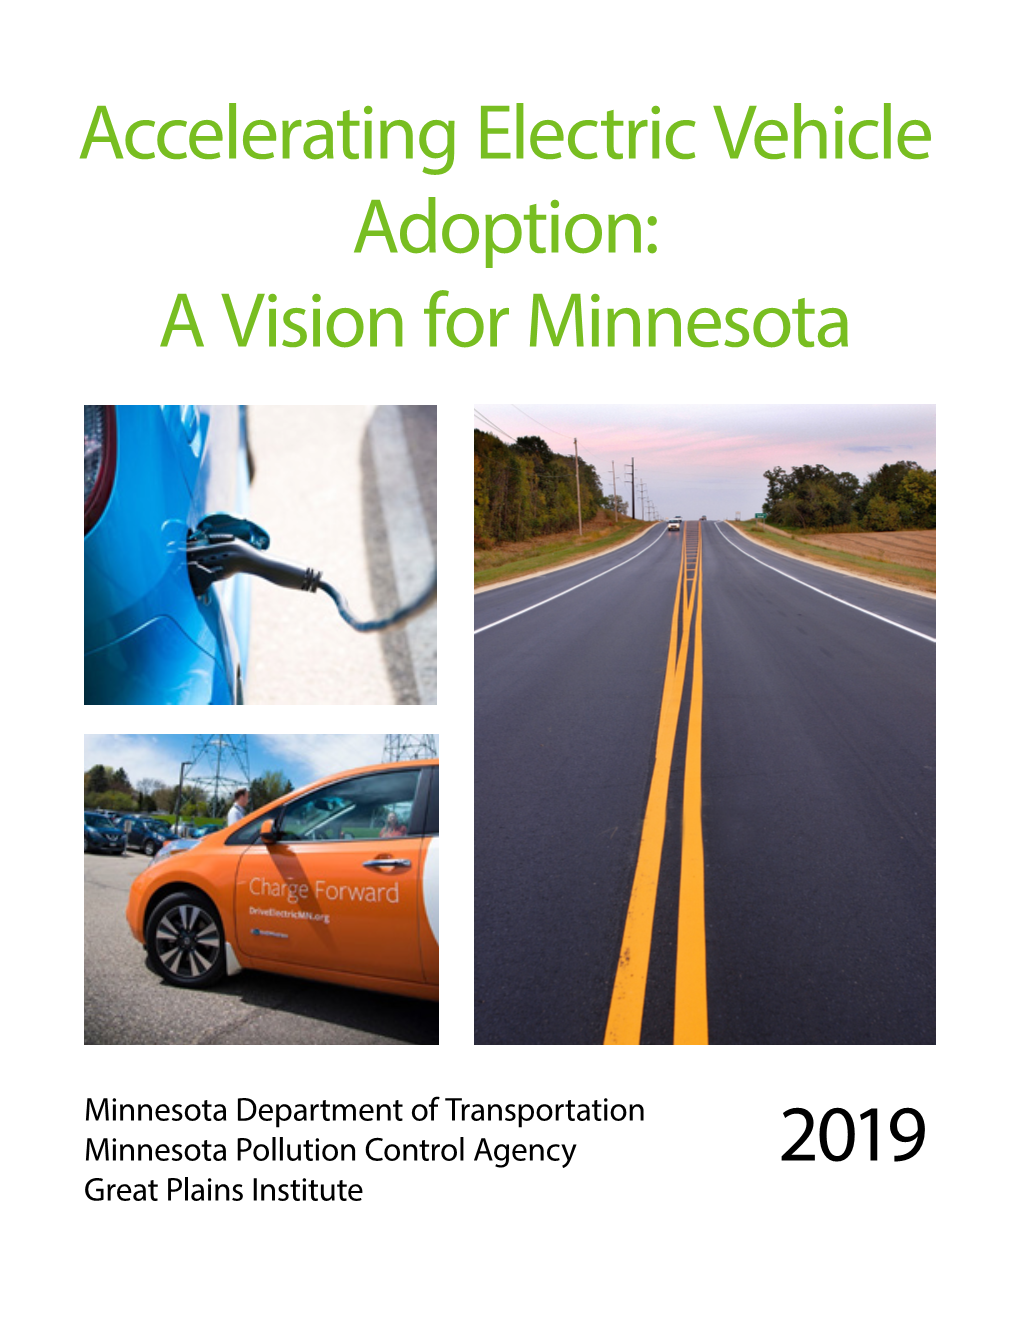 Accelerating Electric Vehicle Adoption: a Vision for Minnesota